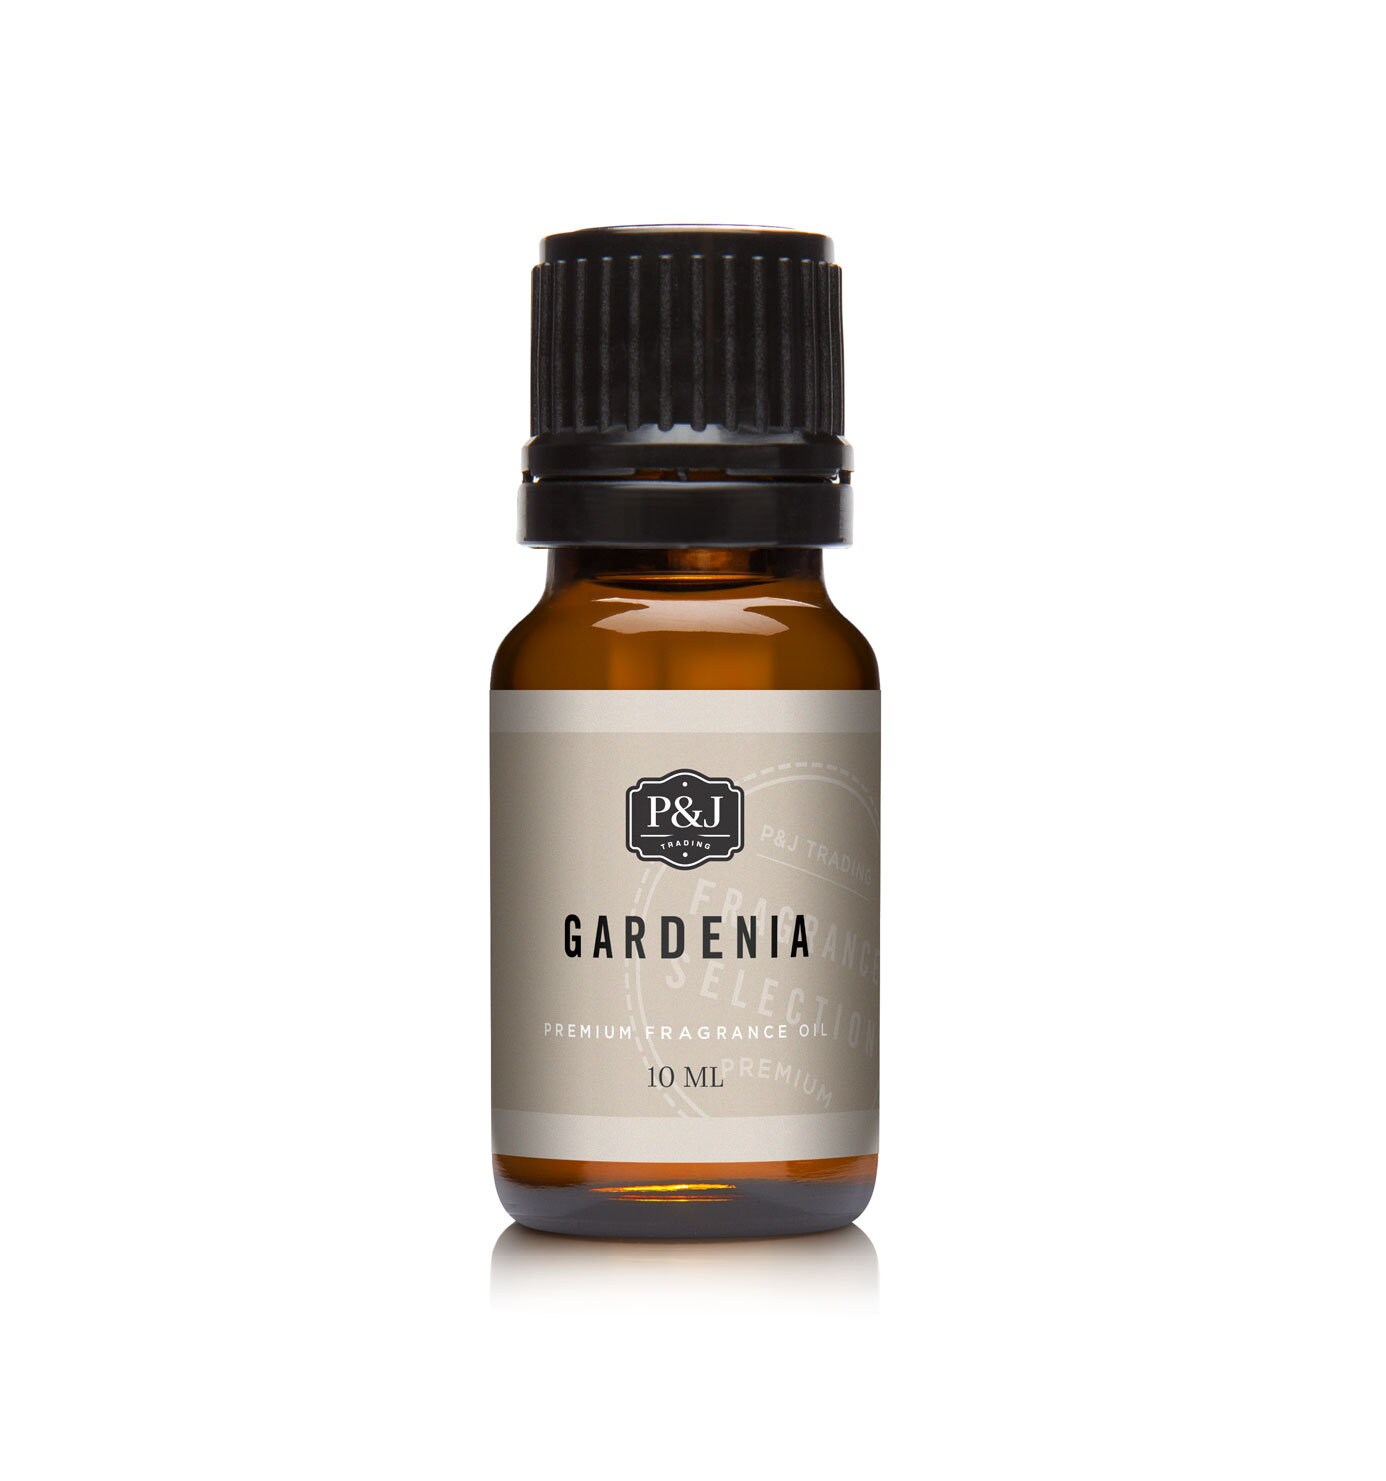 Gardenia Essential Oil 4 Fl Oz (120ml) - Pure and Natural Fragrance Oil,  Gardenia Oil for Aromatherapy, Diffusers, Candle Making, Massage, Soap